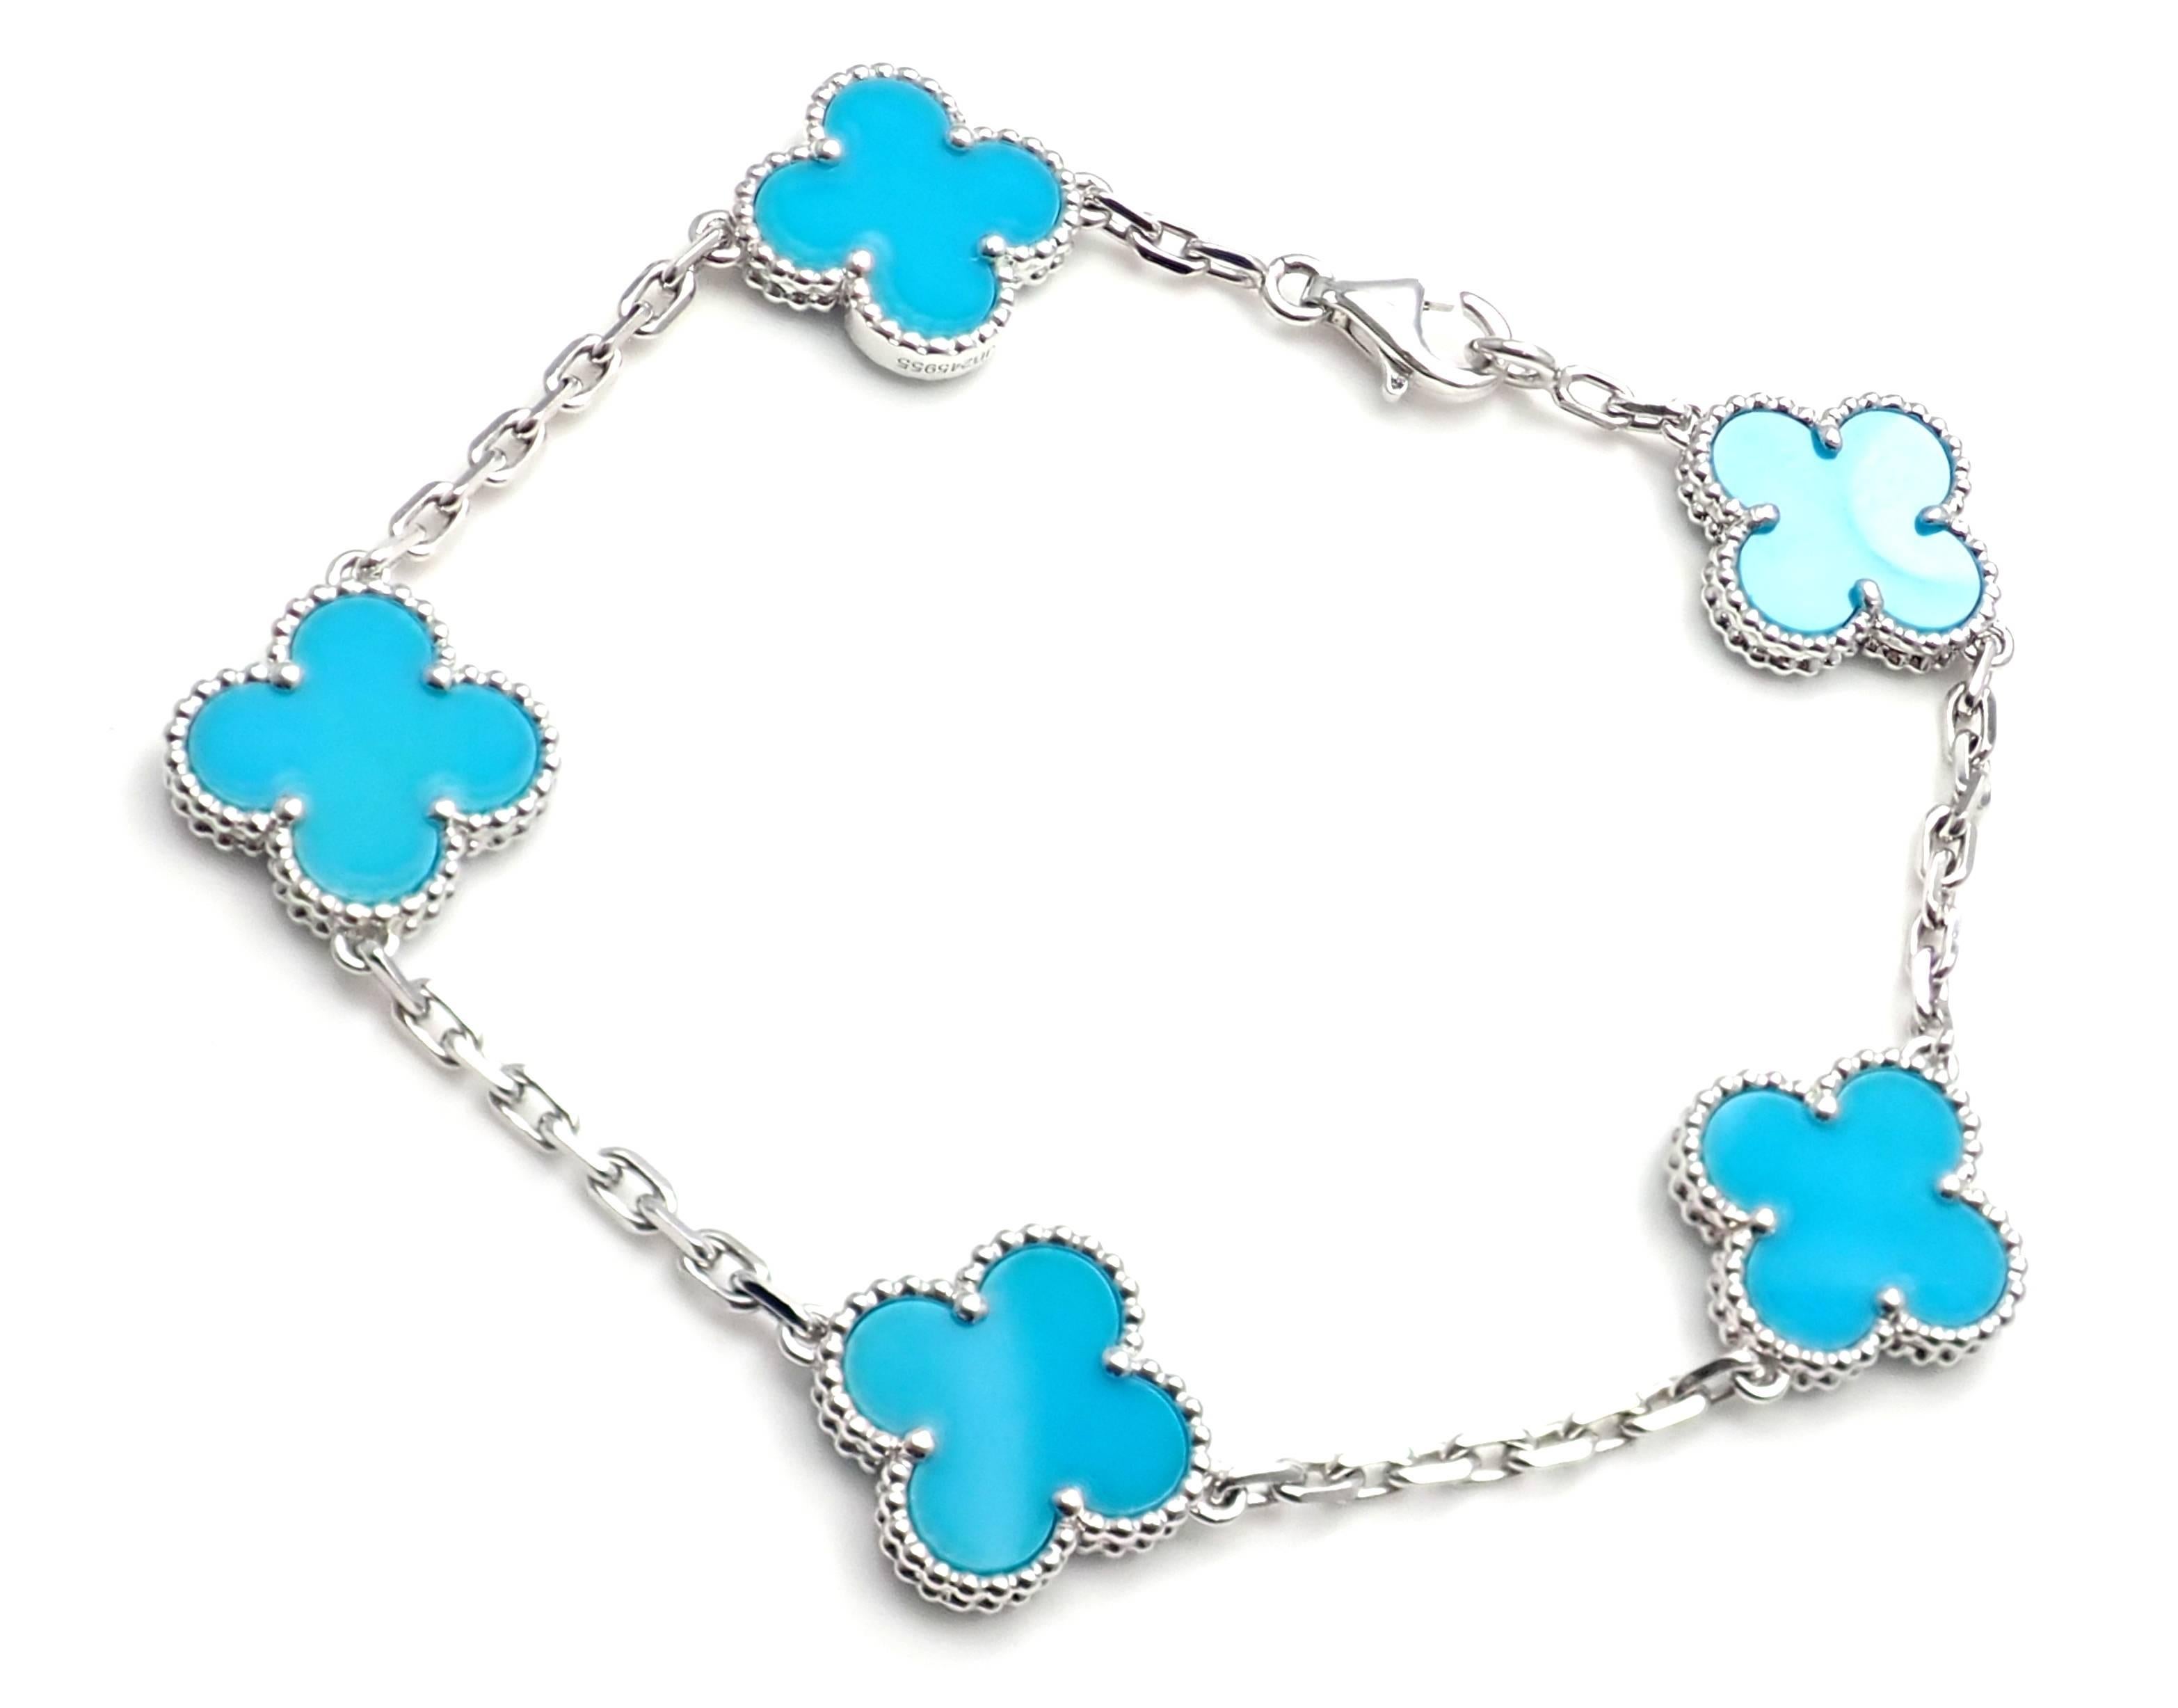 18k White Gold Vintage Turquoise Alhambra Bracelet from Van Cleef & Arpels.  
With 5 alhambra shape turquoise stones. 
This bracelet comes with Van Cleef & Arpels certificate and a box.
Details:  
Length: 7.5'' 
Weight: 11.8 grams
Stamped Hallmarks: